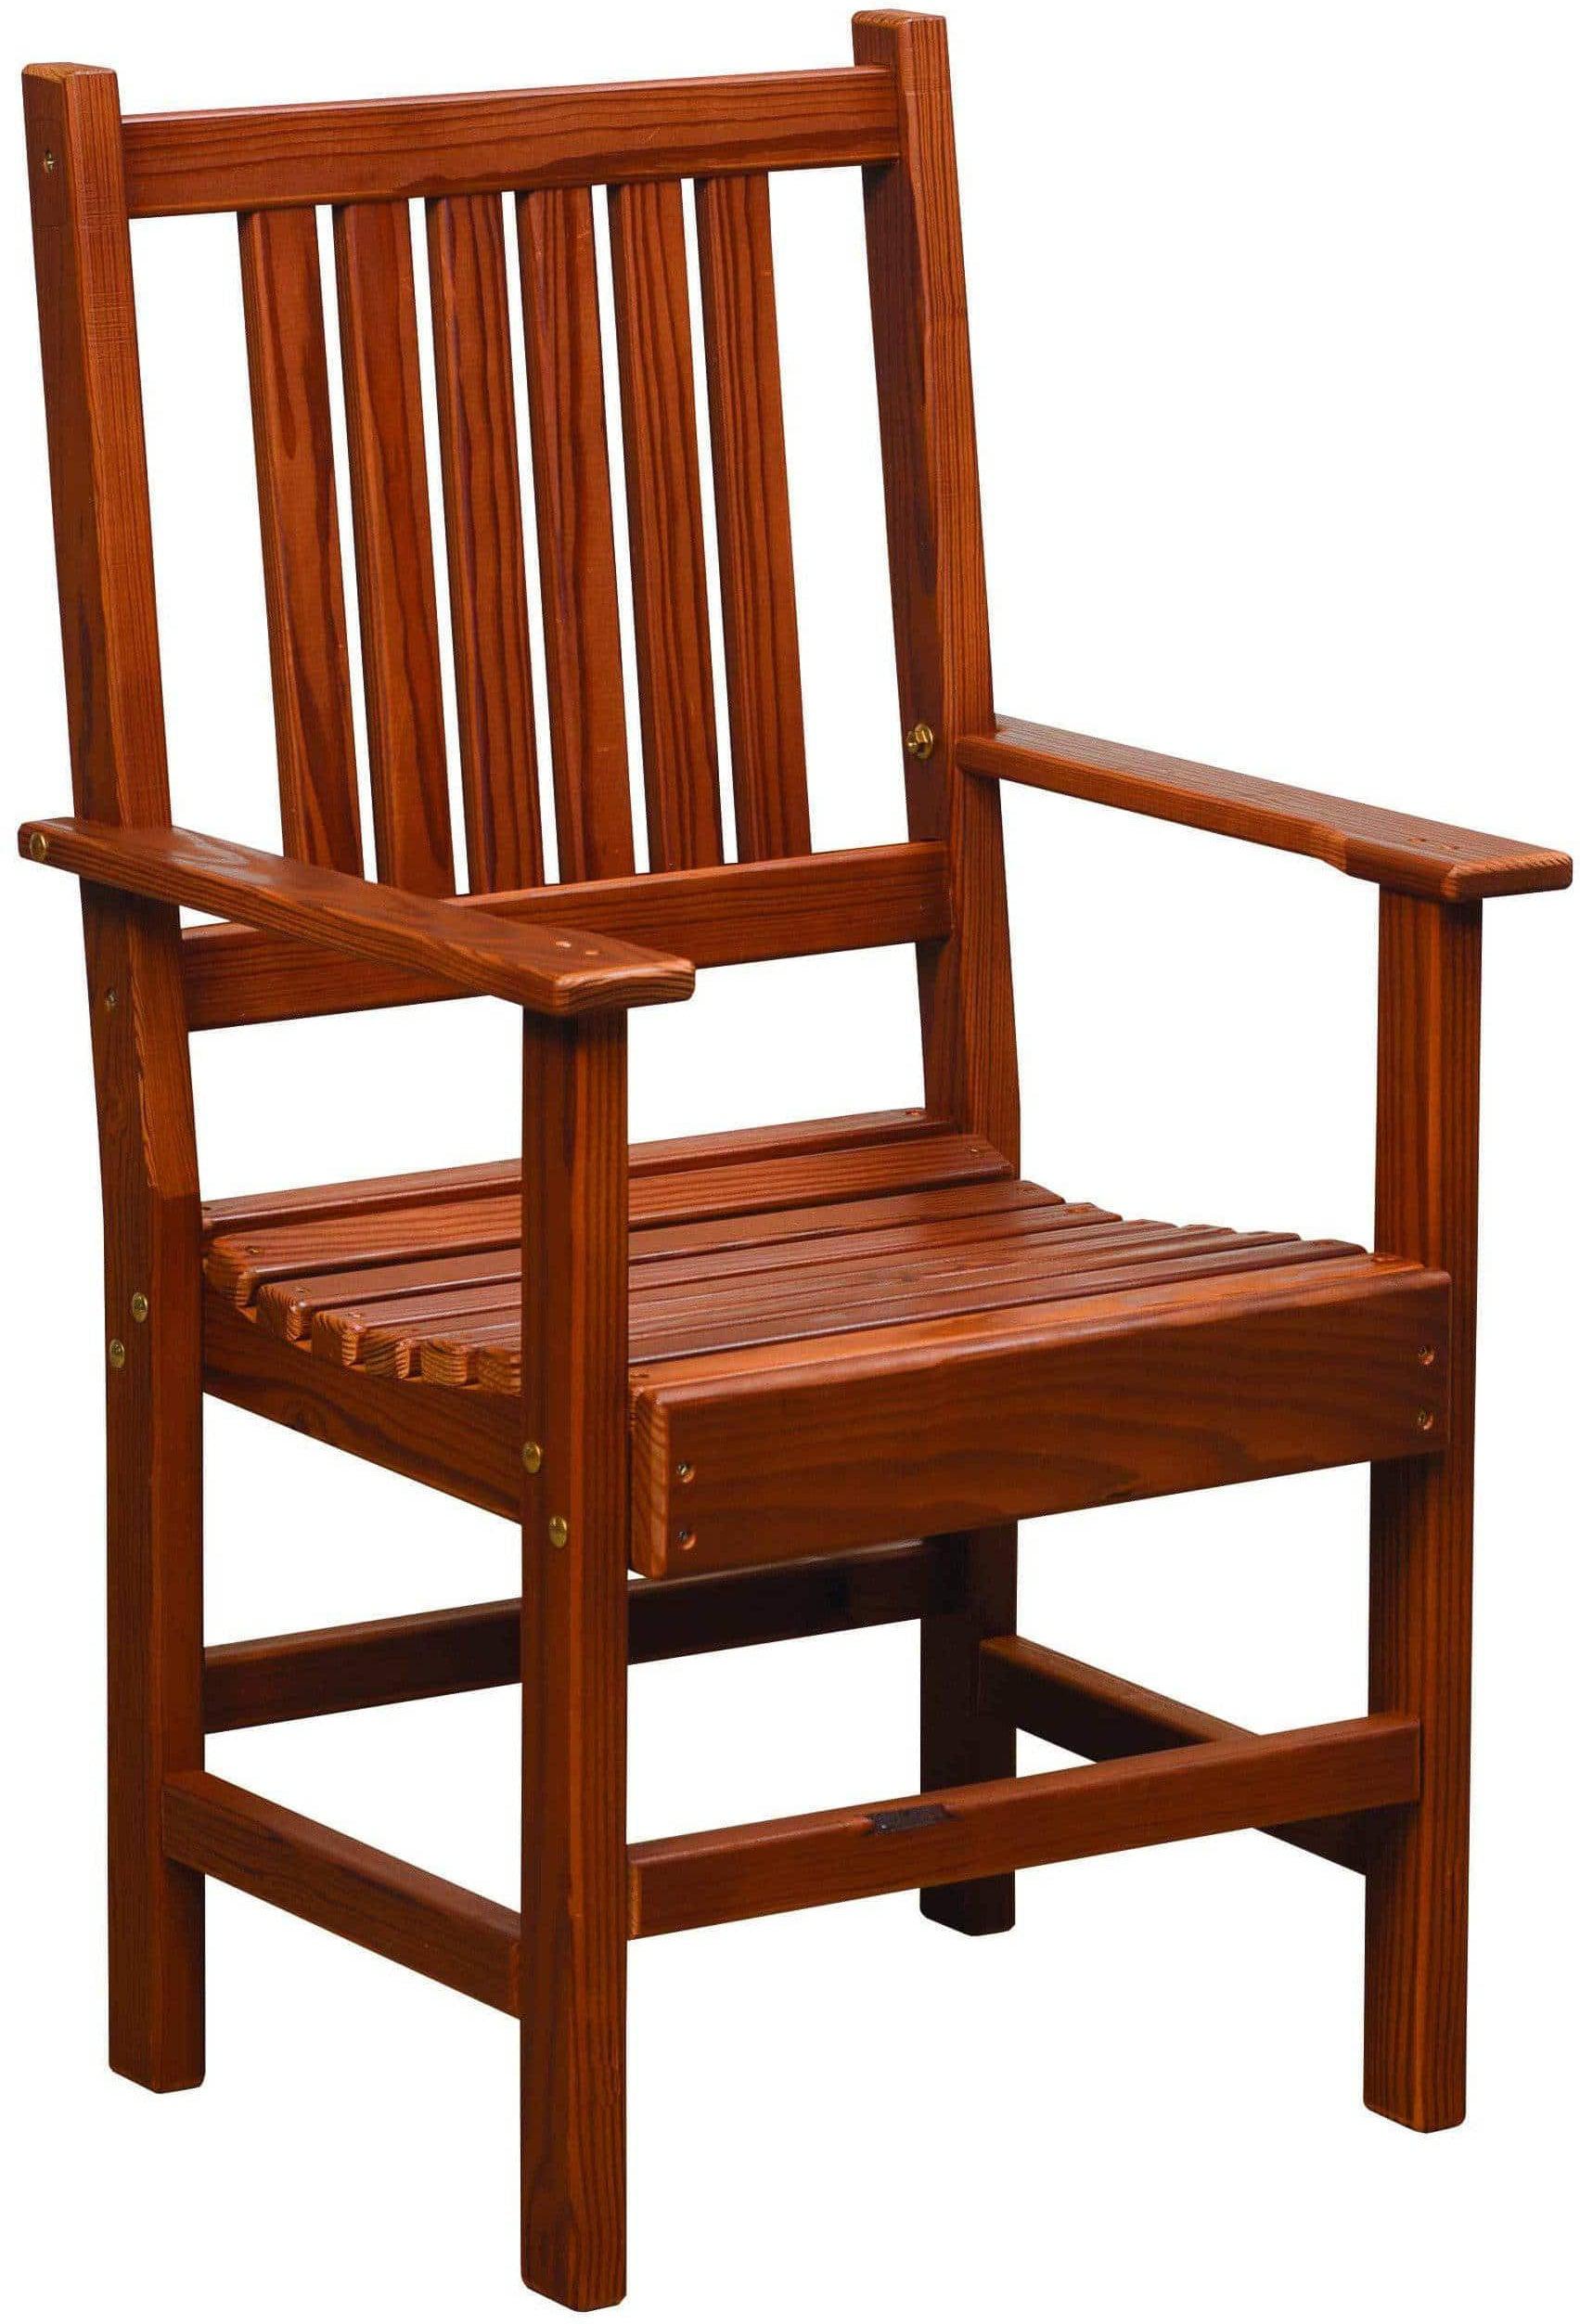 Nature’s Lawn & Patio Patio Chair-Rustic Furniture Marketplace